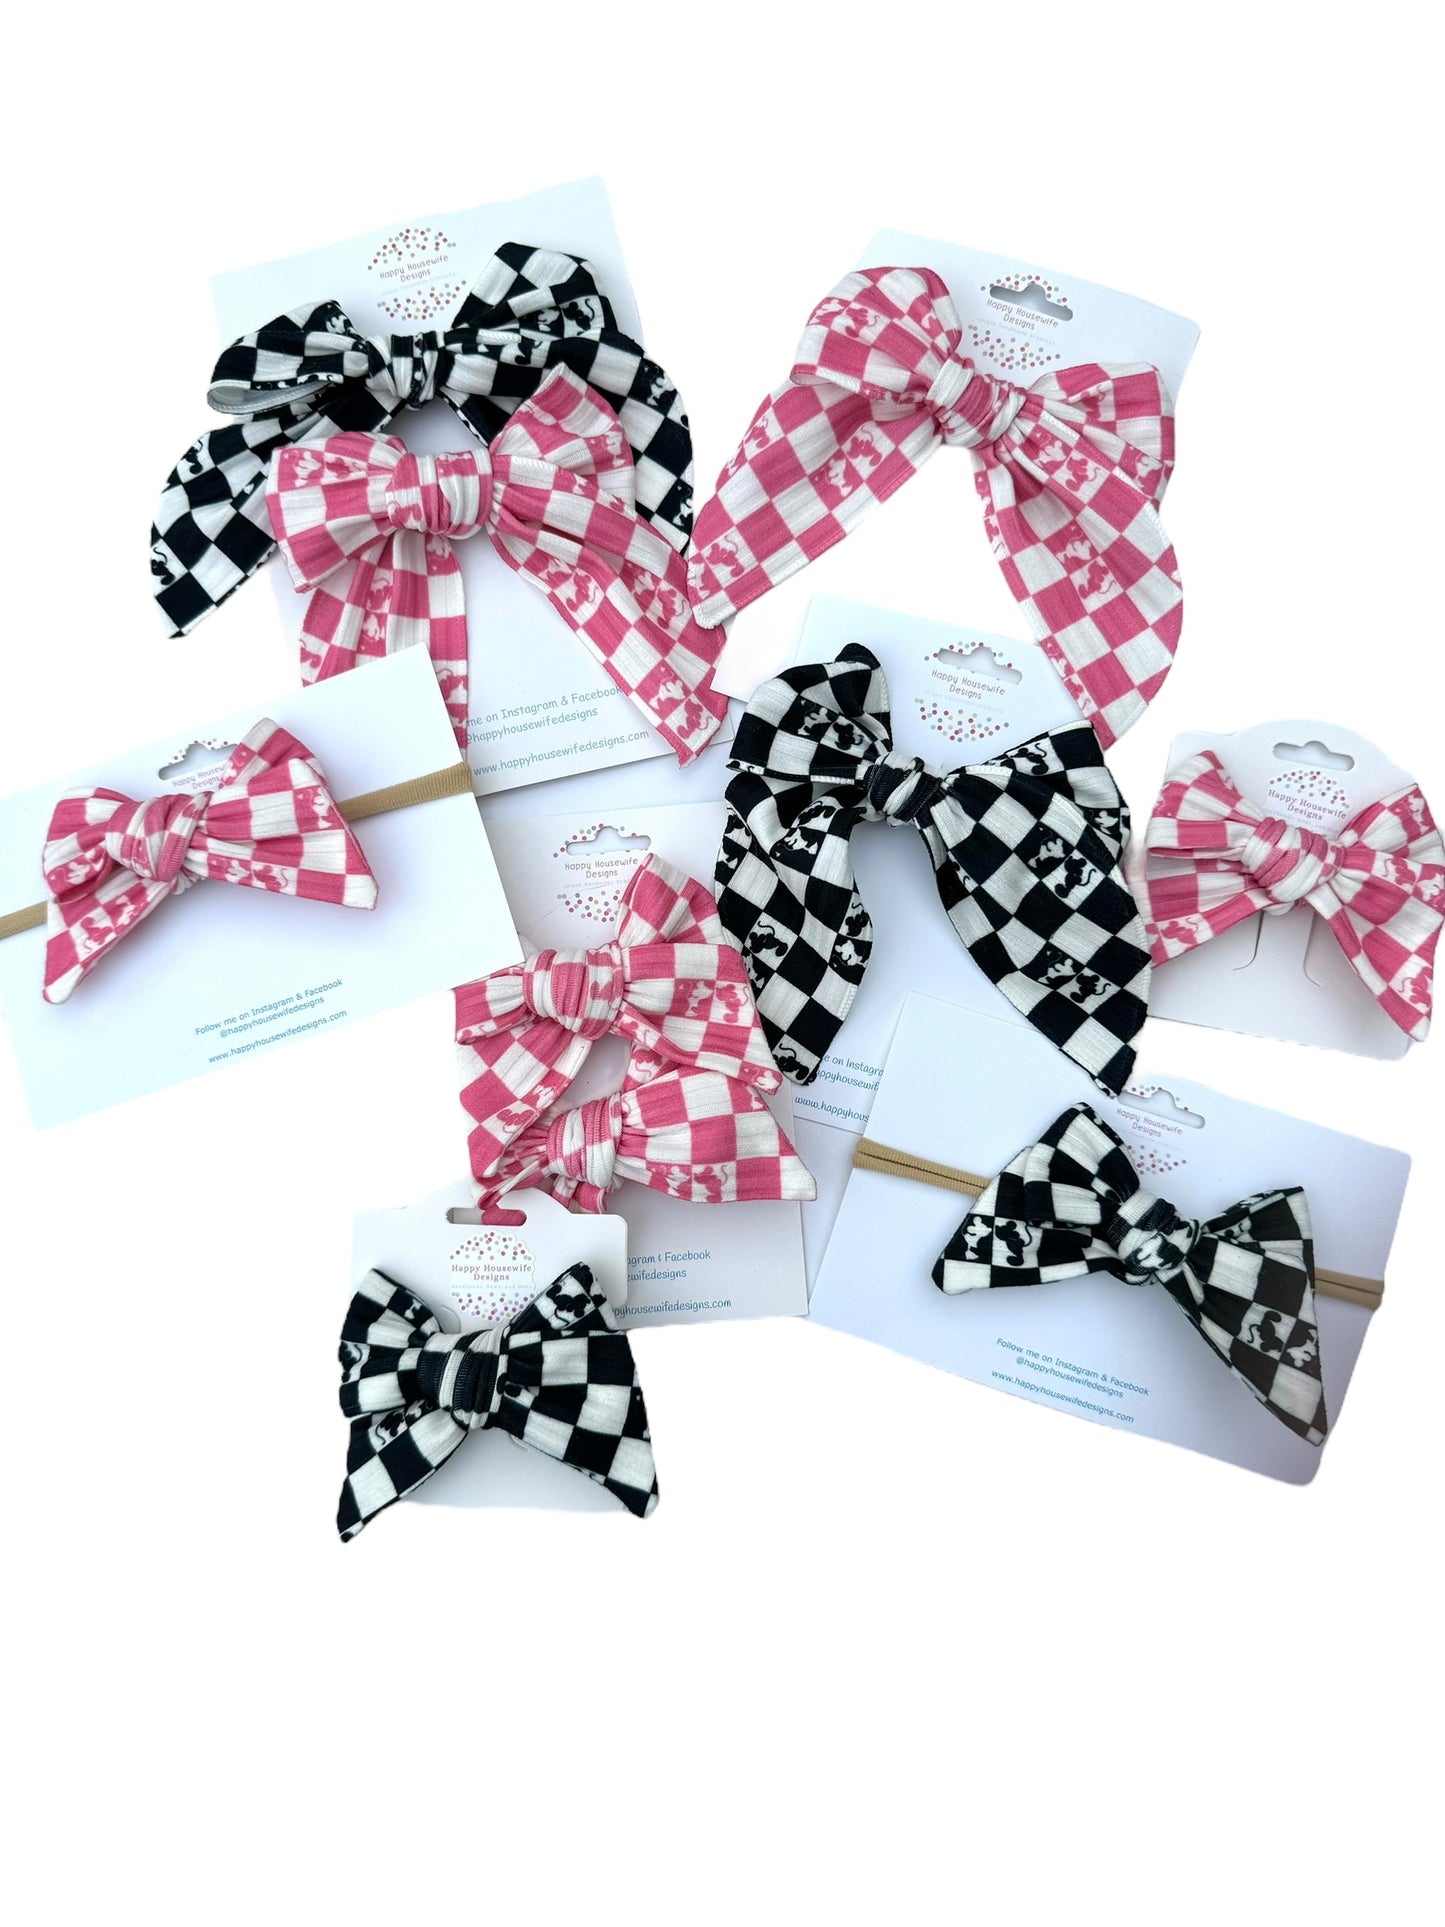 Pink Mouse Kiss Hair Bow